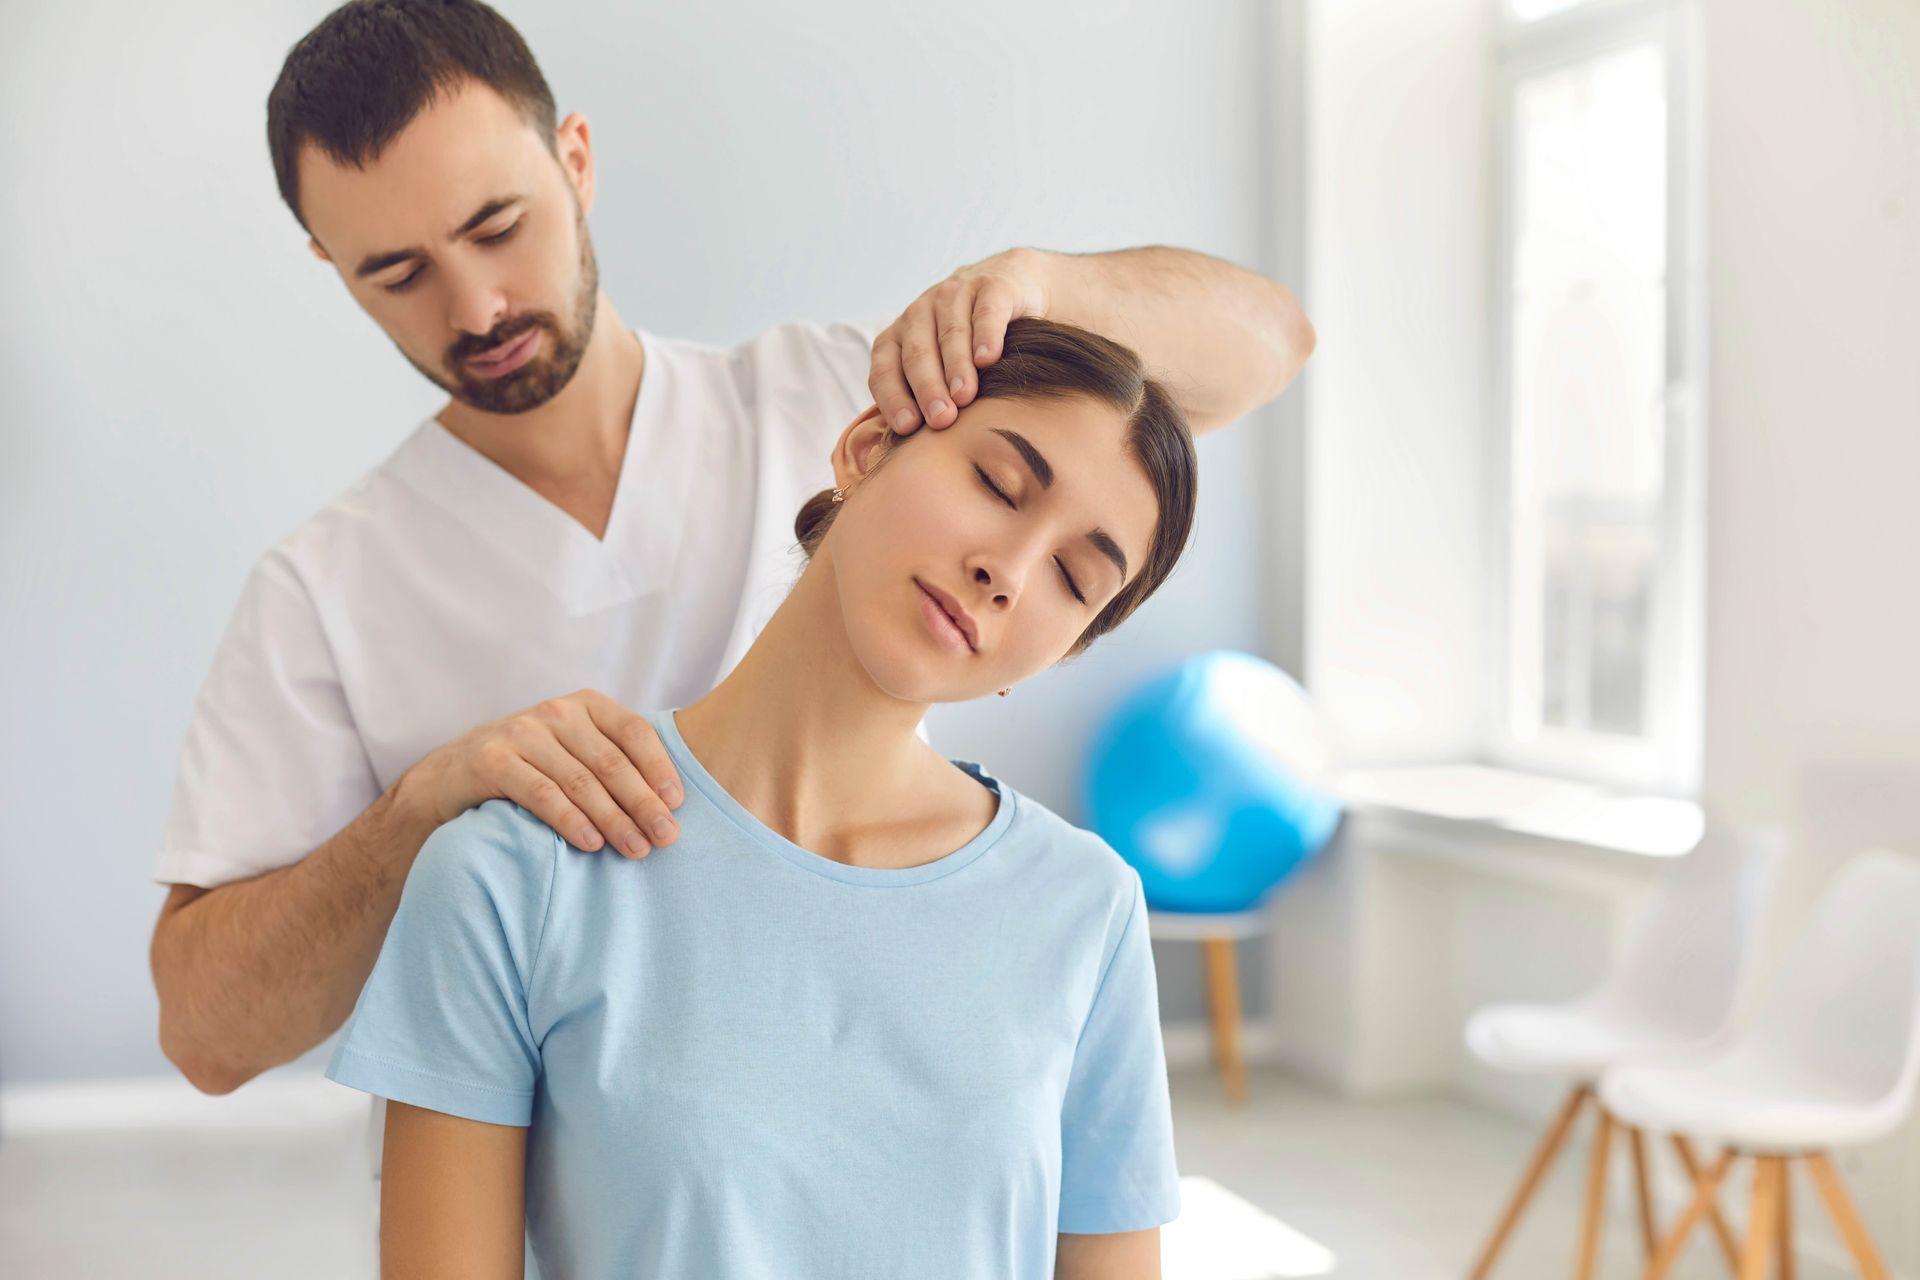 a man is giving a woman a neck massage in a room .